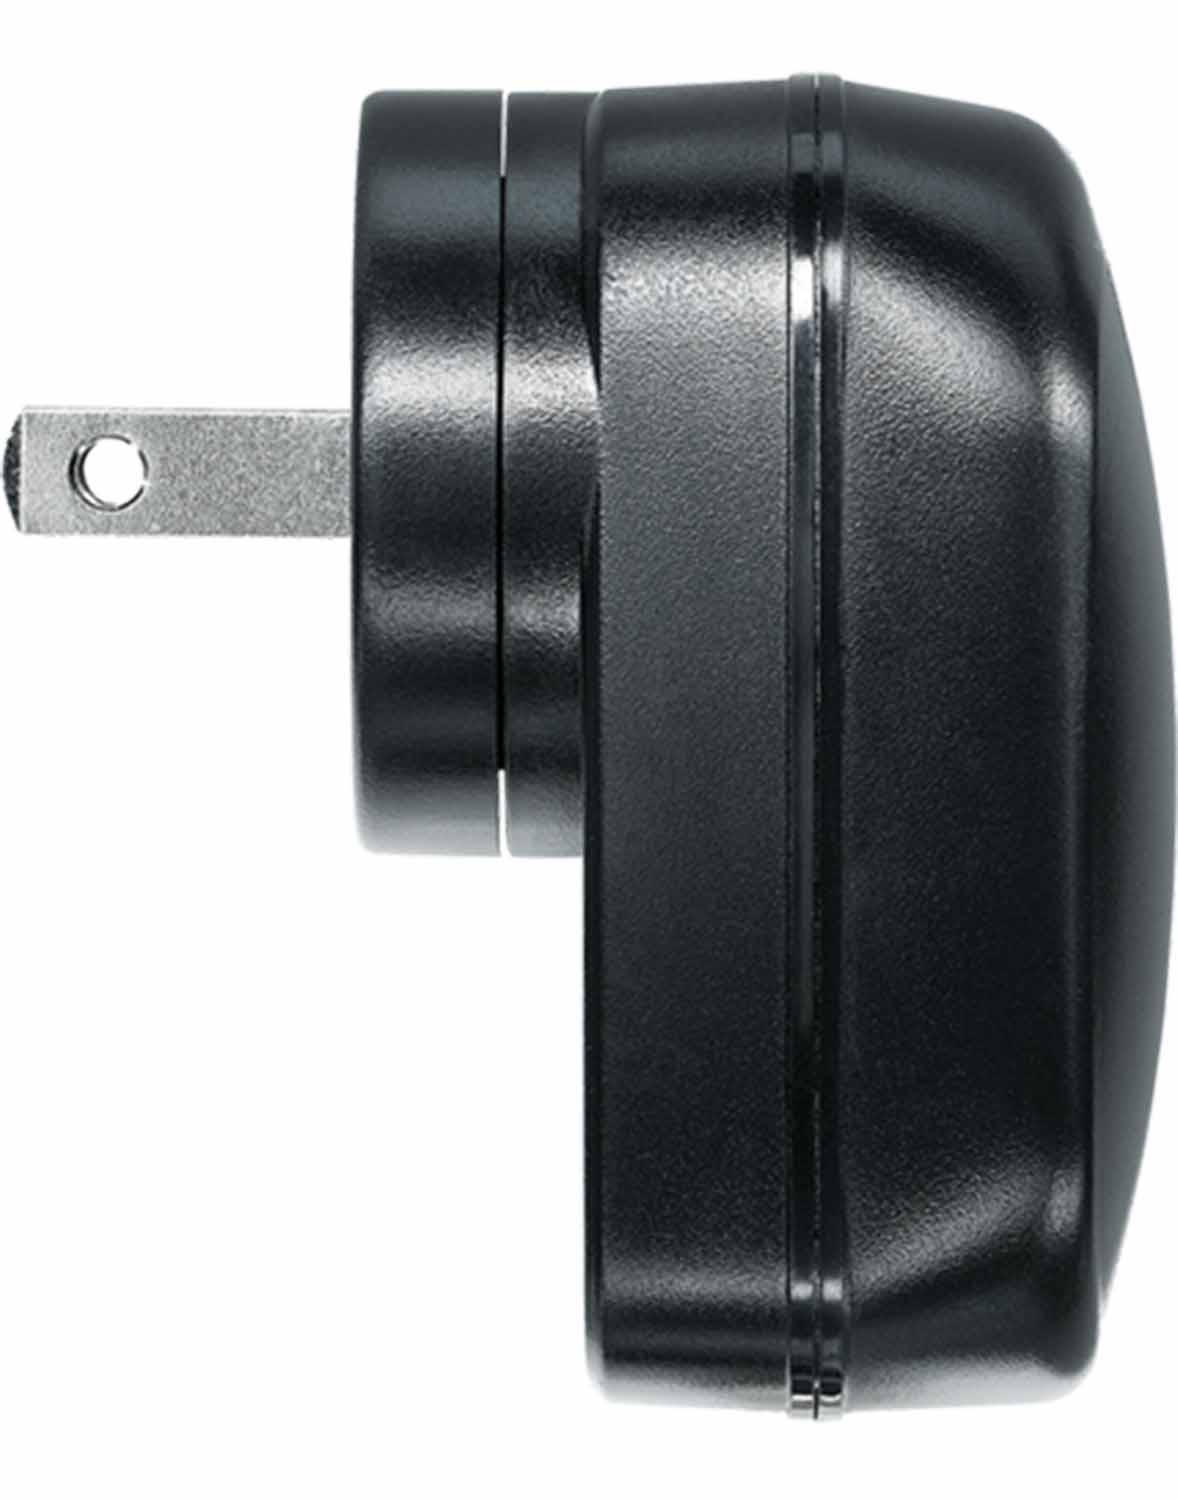 Shure SBC10-USB-A 6' Wall Charger for MXW Transmitters and Other Devices - Hollywood DJ